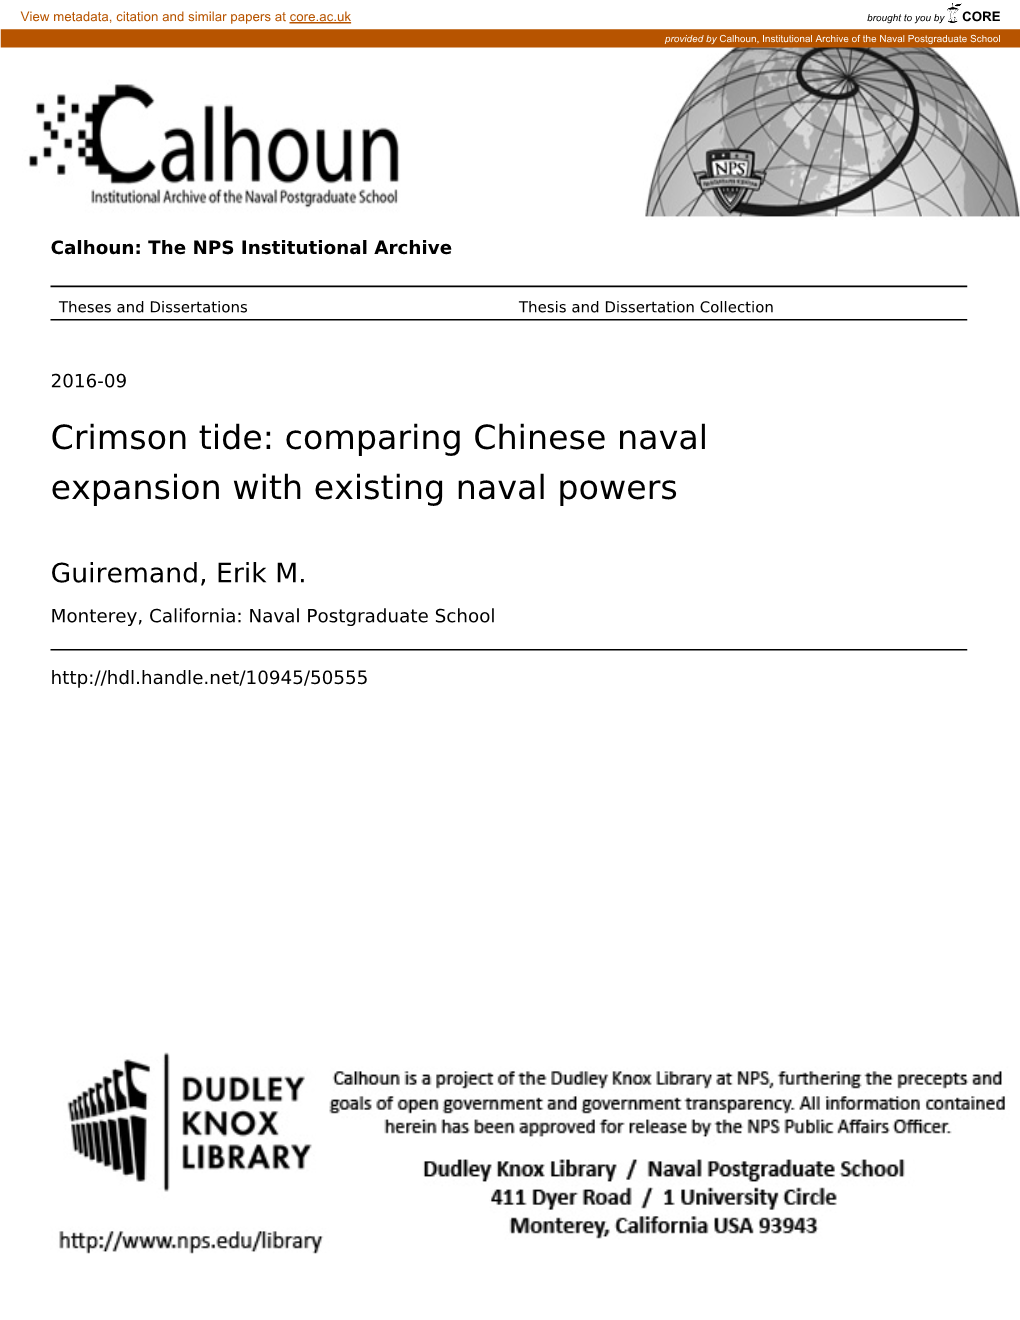 Crimson Tide: Comparing Chinese Naval Expansion with Existing Naval Powers